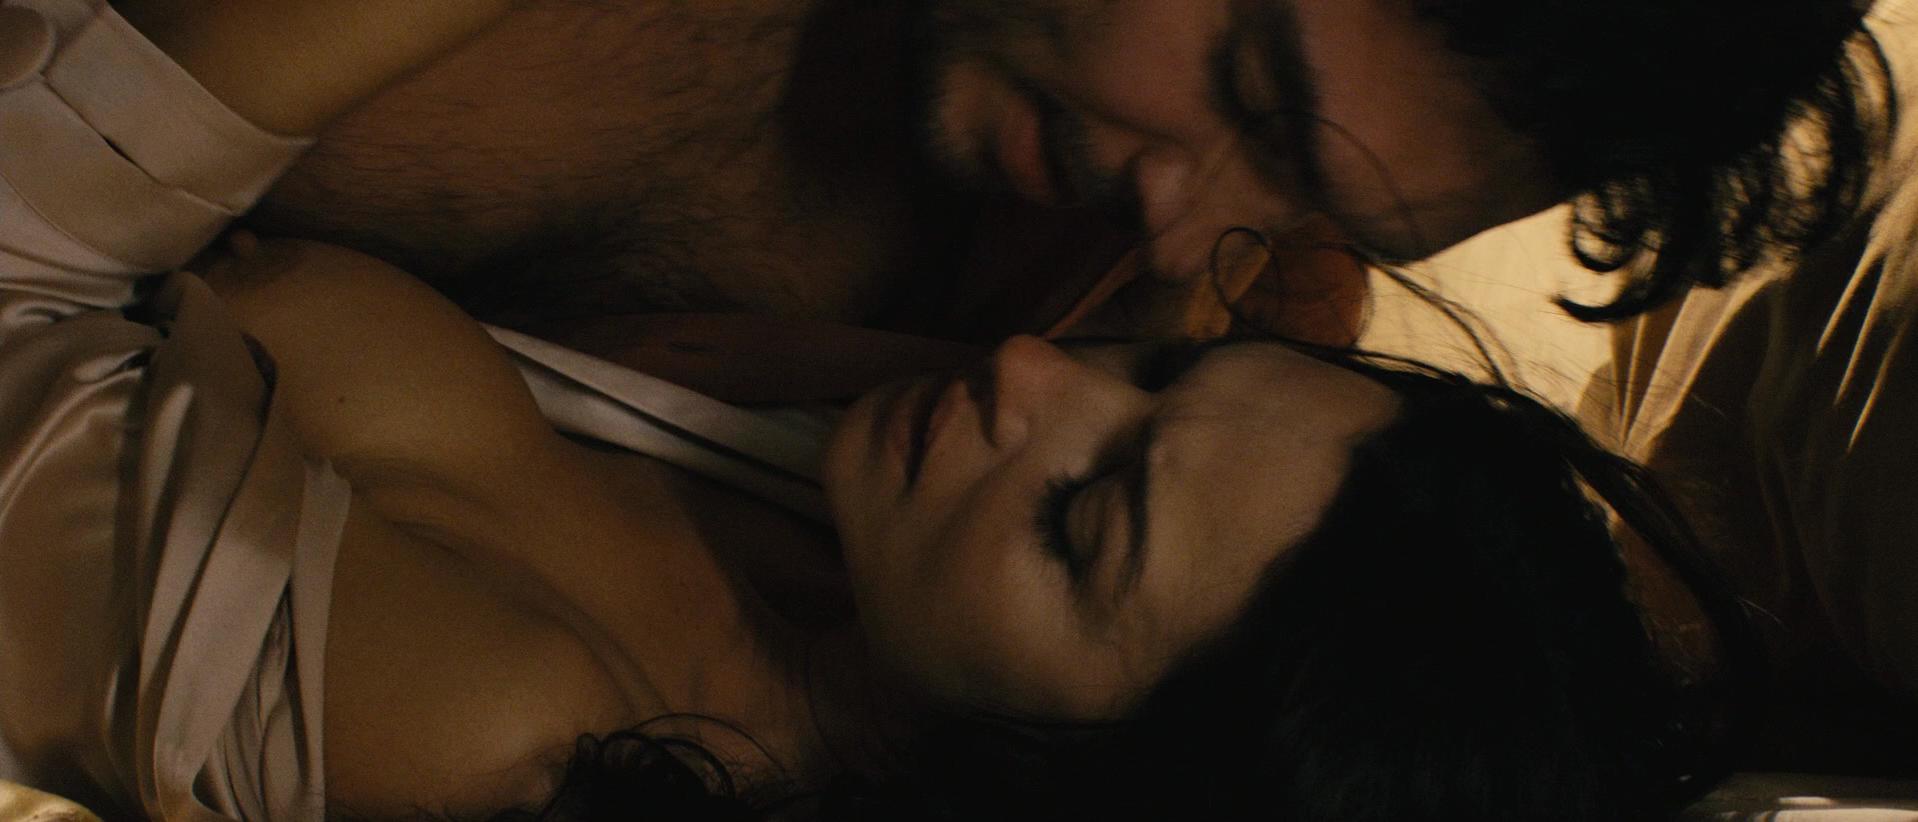 Monica Bellucci nude - Don't Look Back (2009)